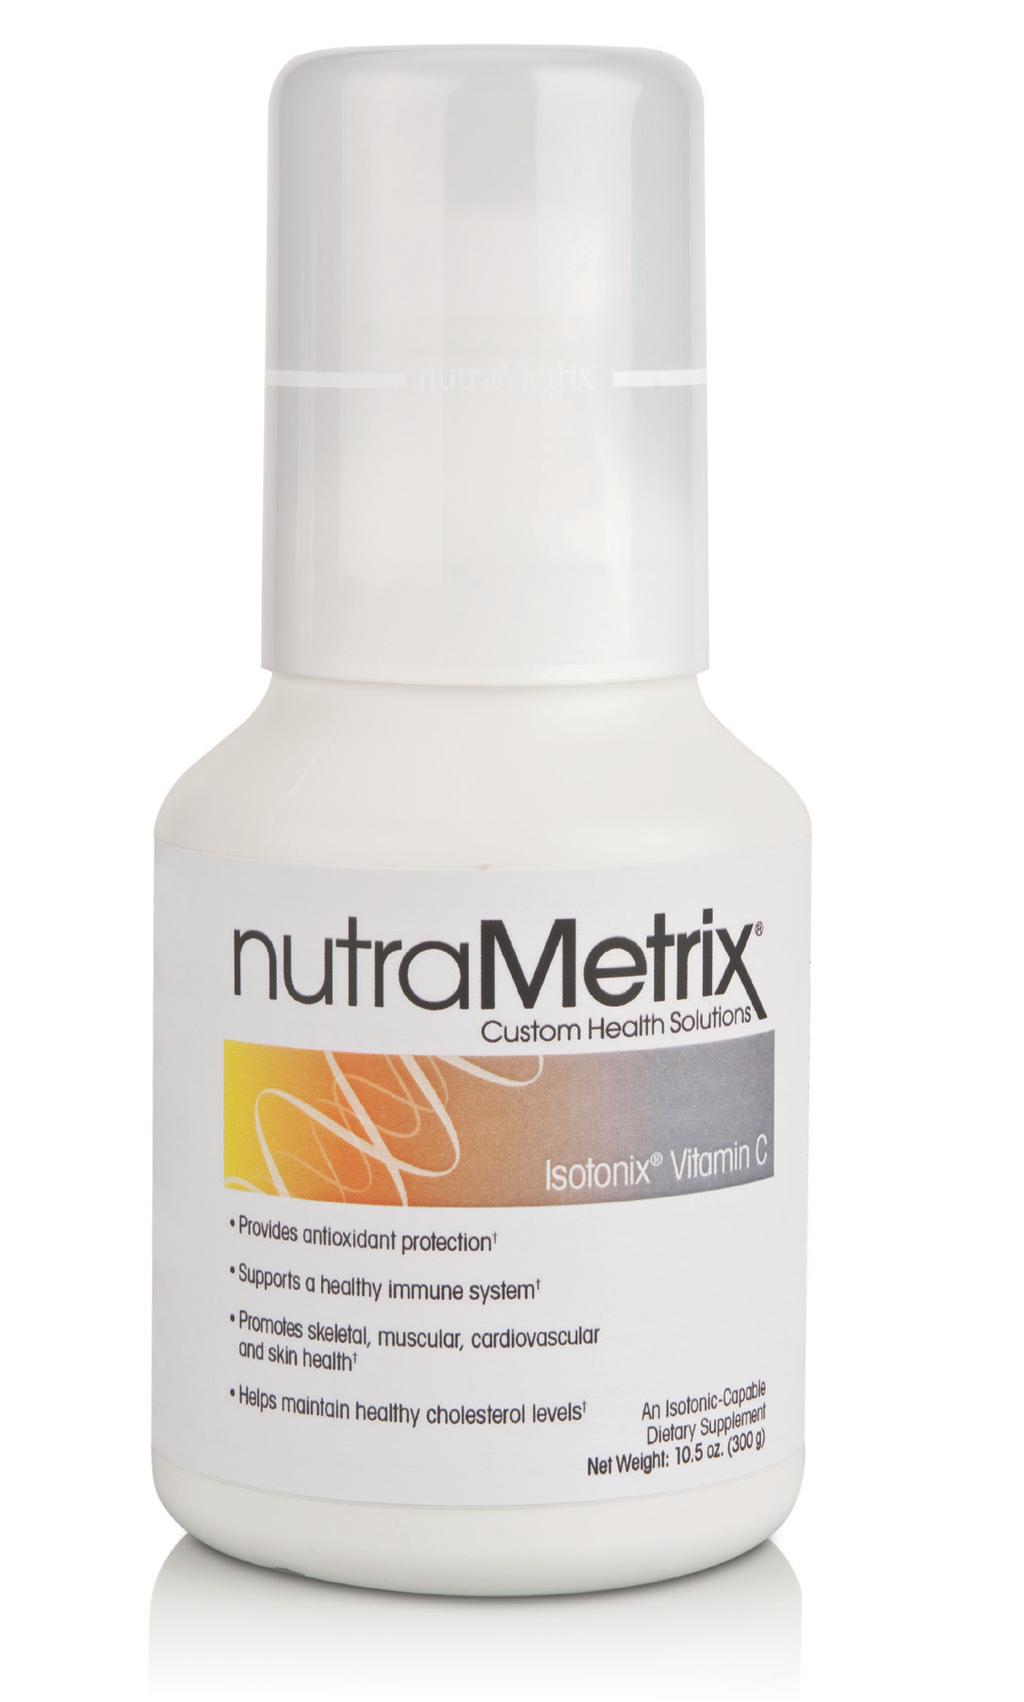 nutrametrix Isotonix Vitamin C Provides antioxidant protection Supports a healthy immune system Promotes skeletal, muscular,